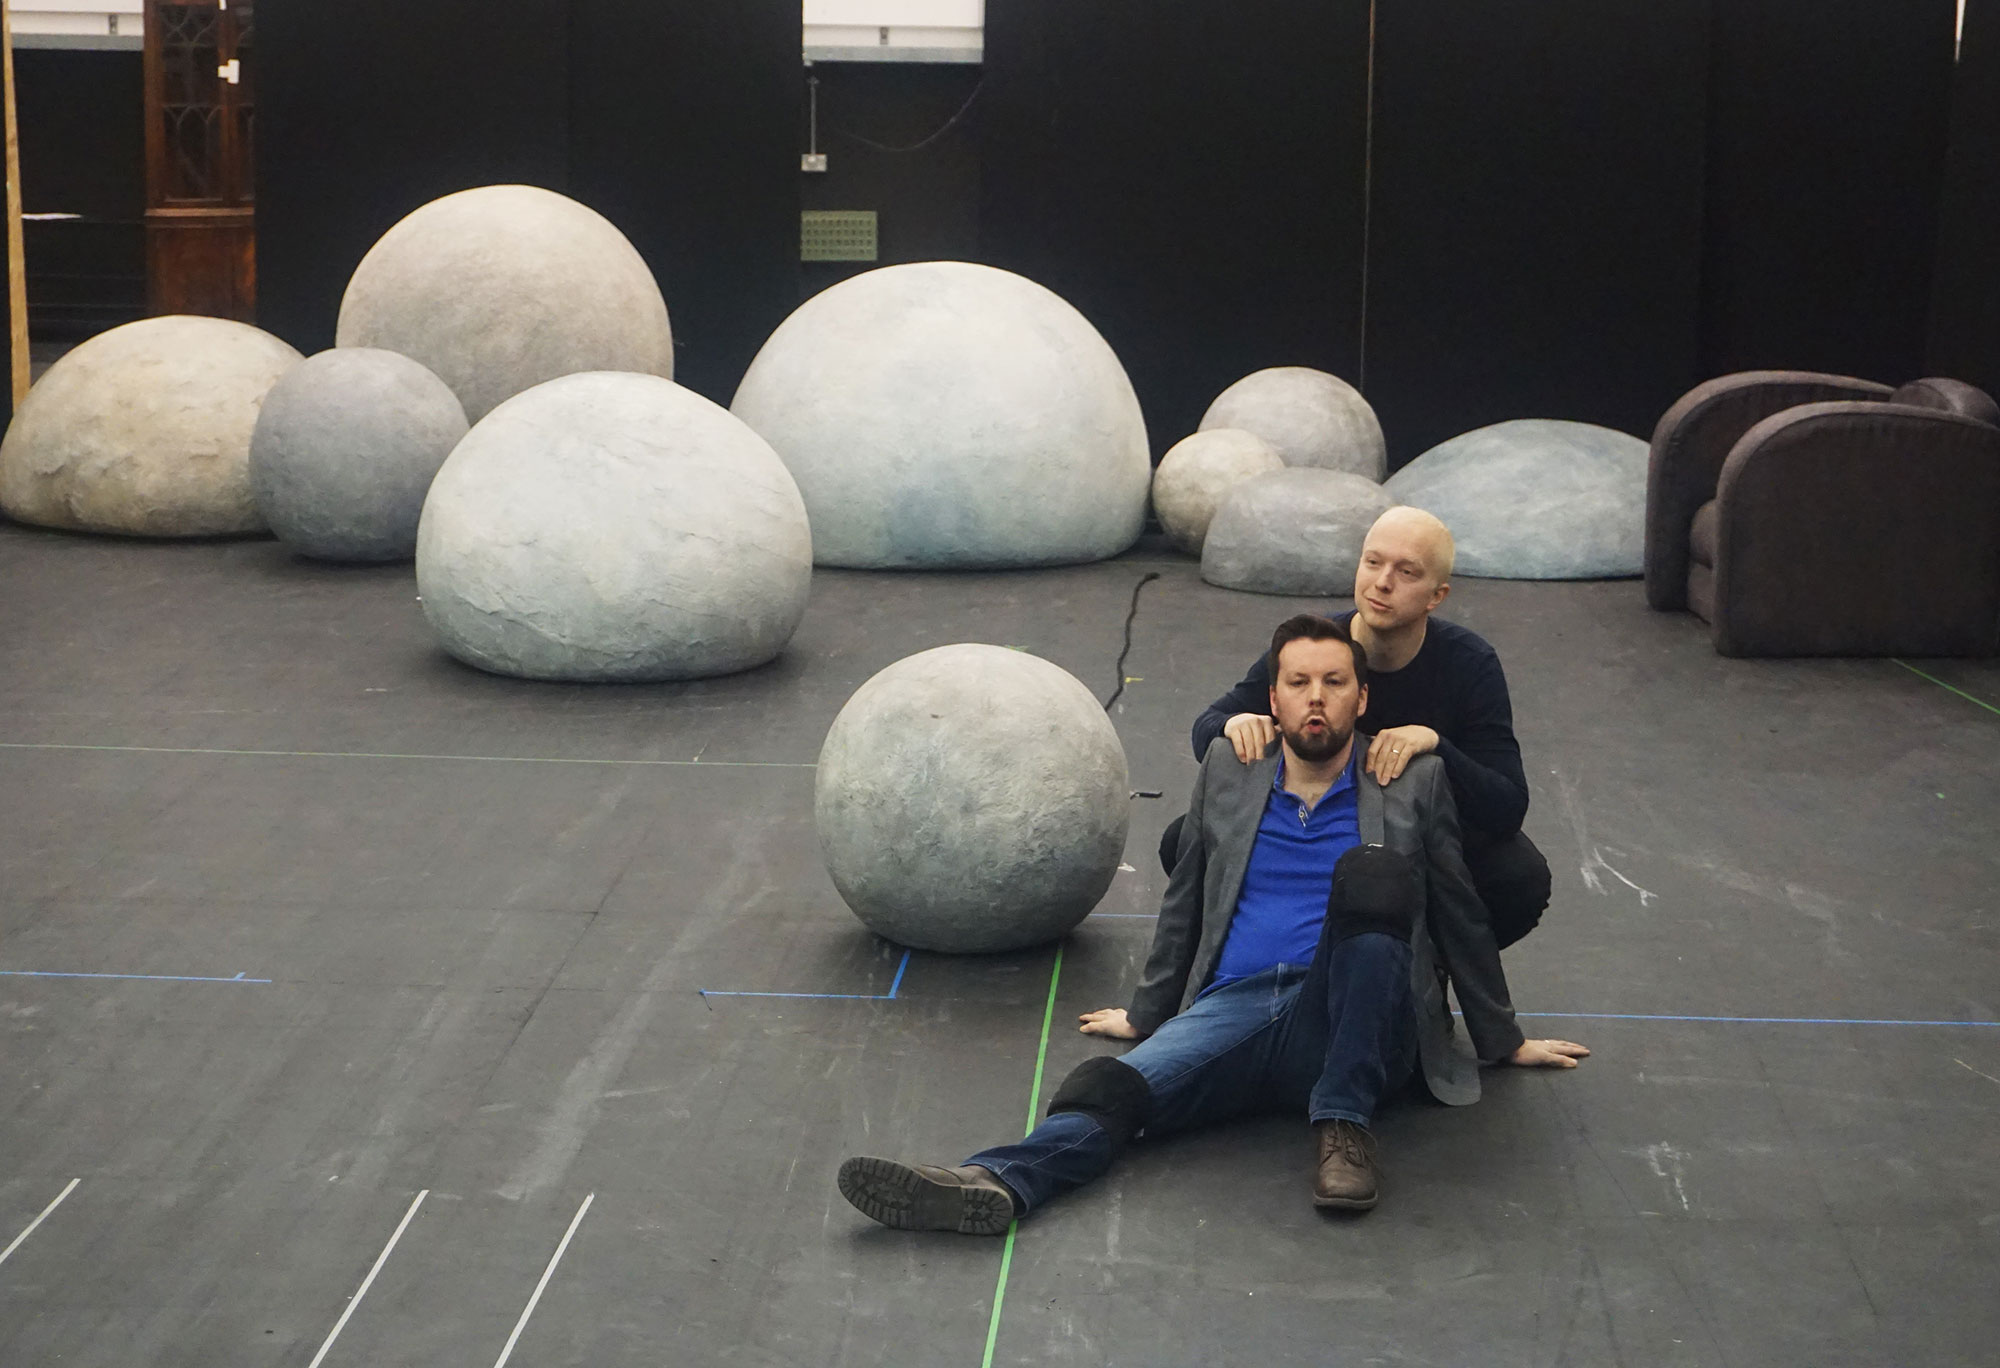 two men sat on floor surrounded by white blobs rehearsing on stage